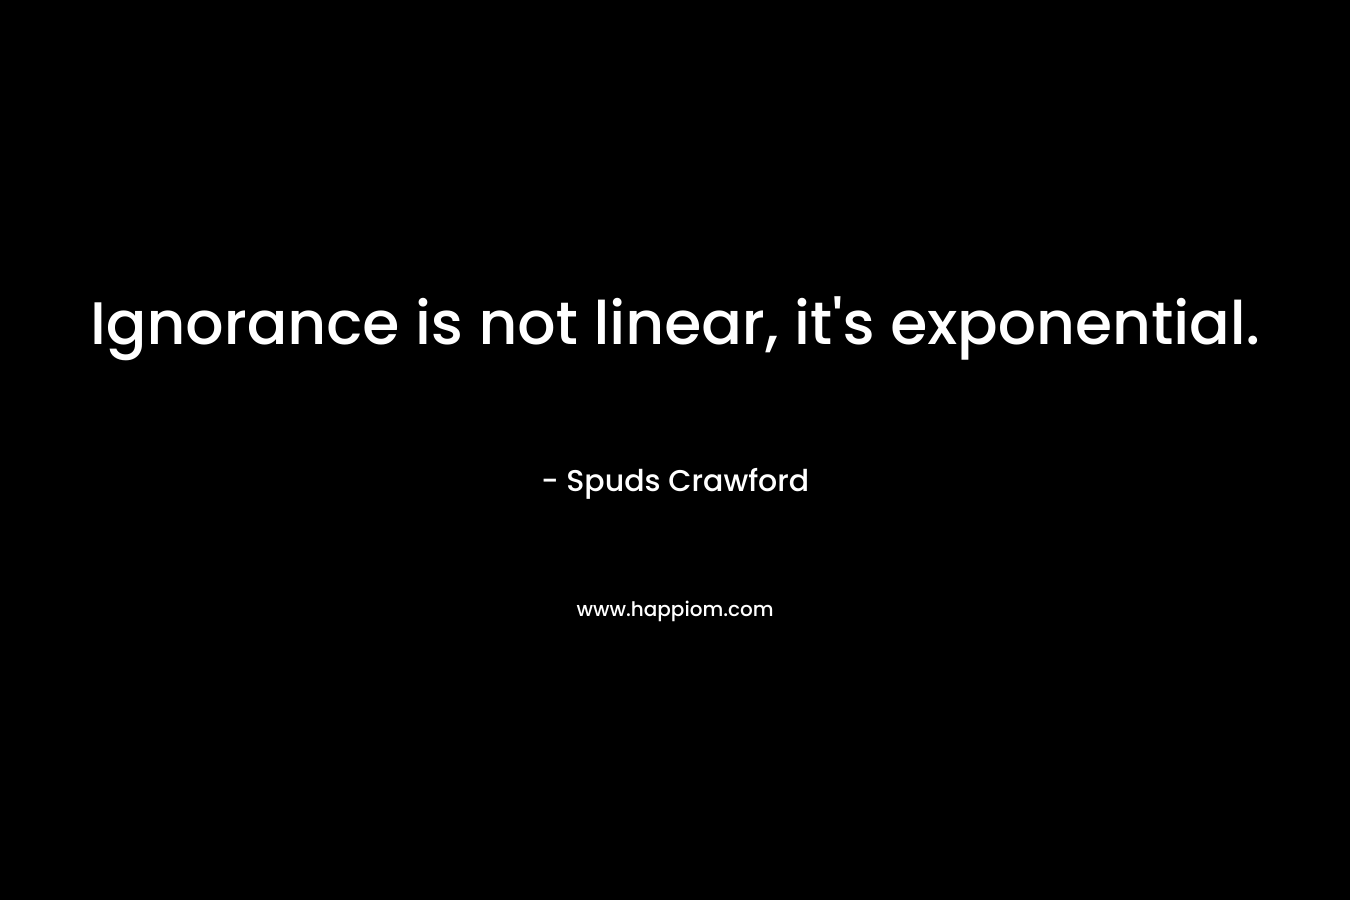 Ignorance is not linear, it’s exponential. – Spuds Crawford